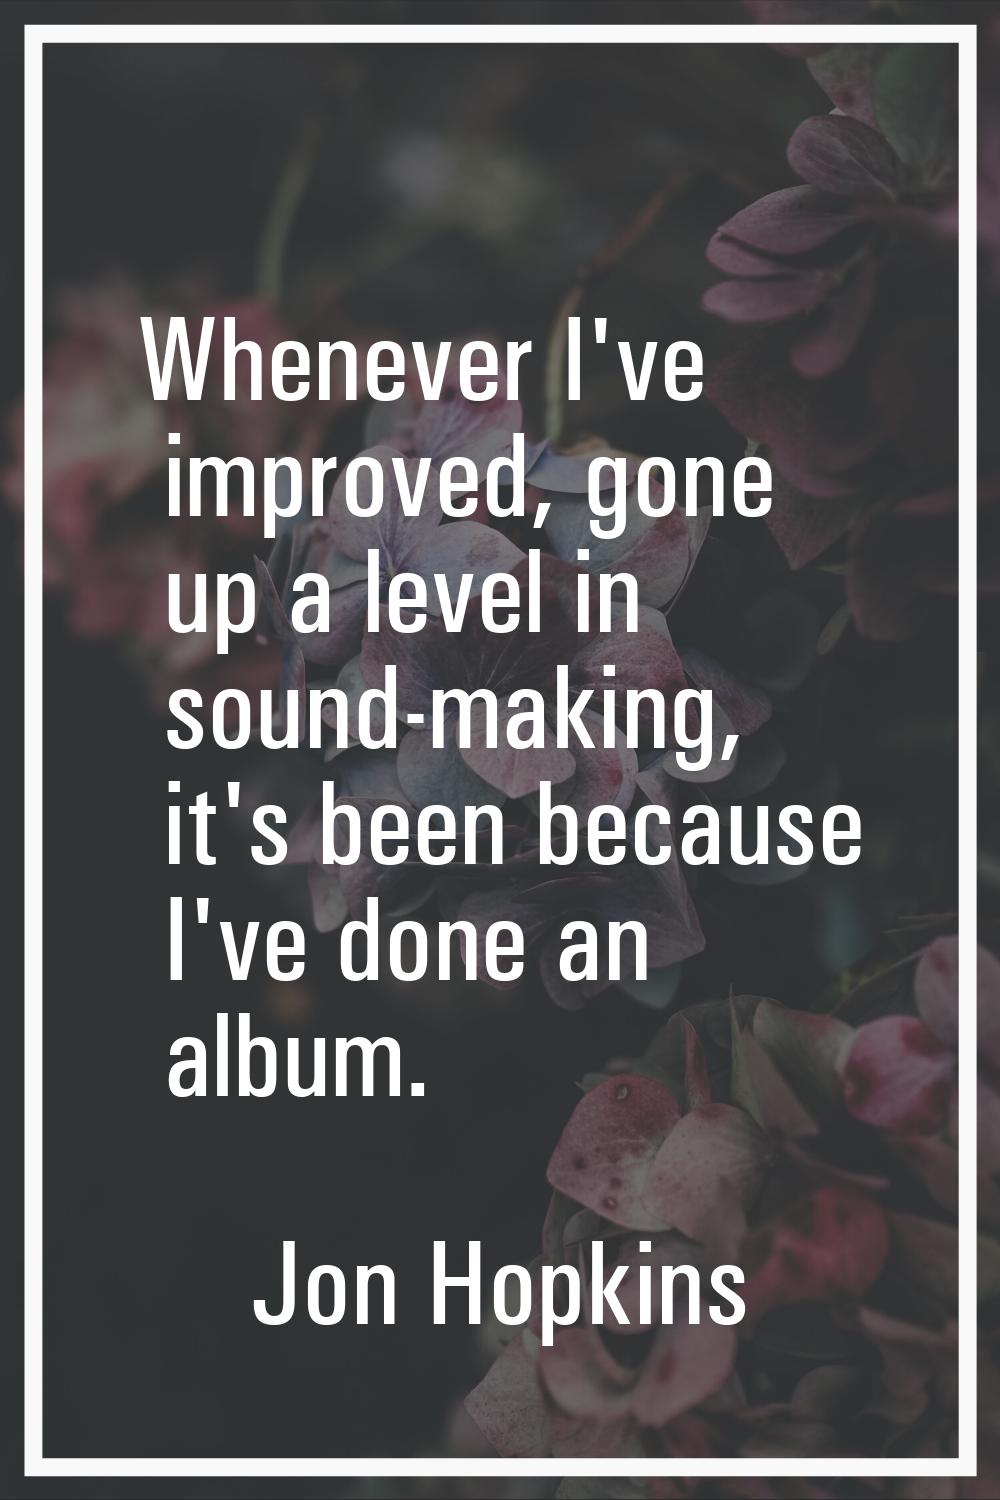 Whenever I've improved, gone up a level in sound-making, it's been because I've done an album.